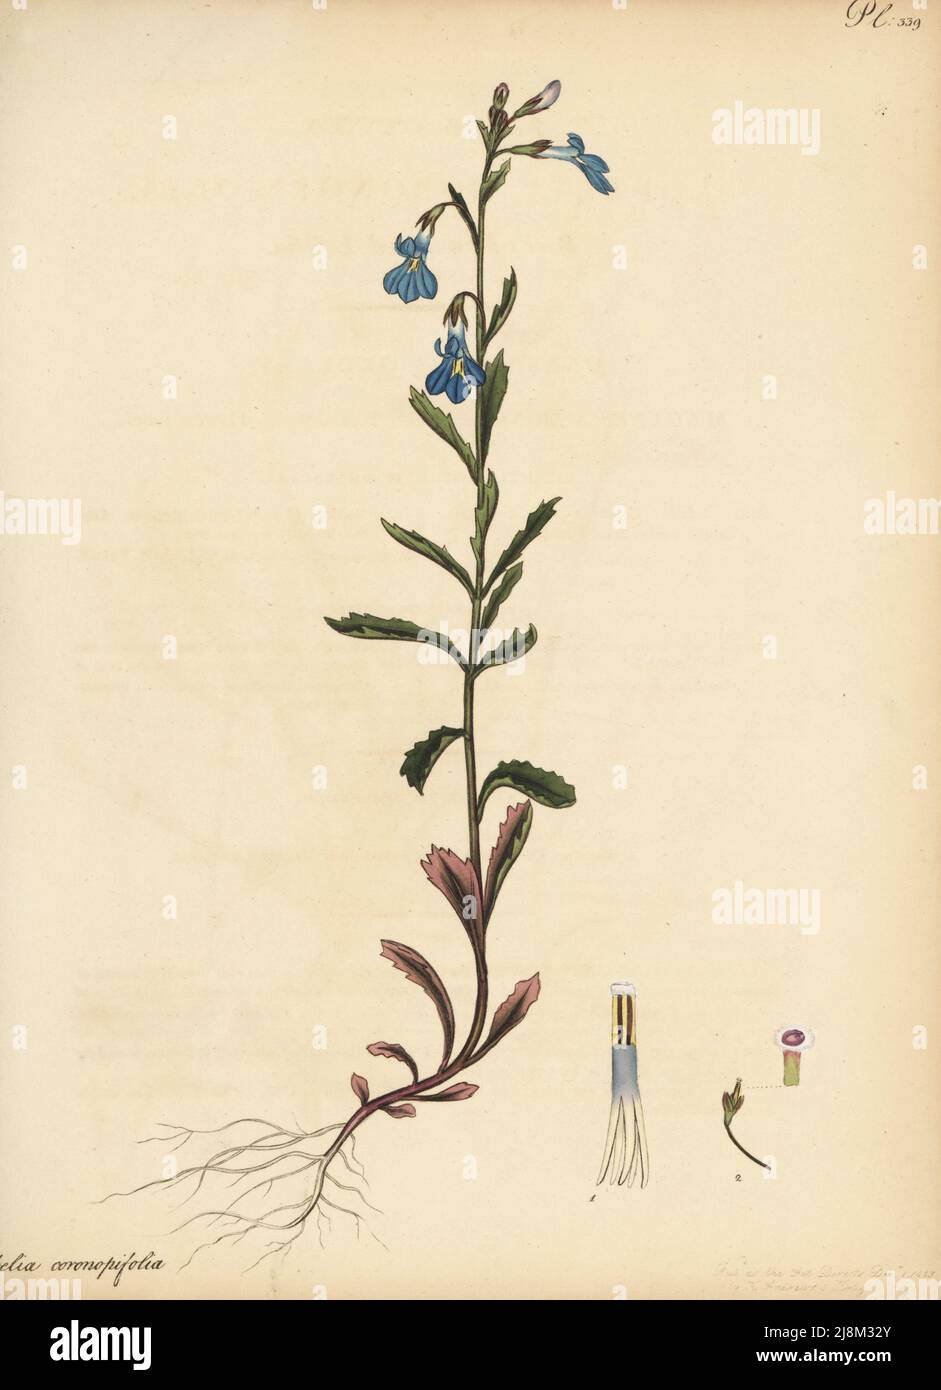 Lobelia coronopifolia. Buck's-horn-leaved lobelia, Lobelia coronopifolium. From the Cape of Good Hope, South Africa, introduced by Francis Masson to Kew Gardens. Copperplate engraving drawn, engraved and hand-coloured by Henry Andrews from his Botanical Register, Volume 5, self-published in Knightsbridge, London, 1803. Stock Photo